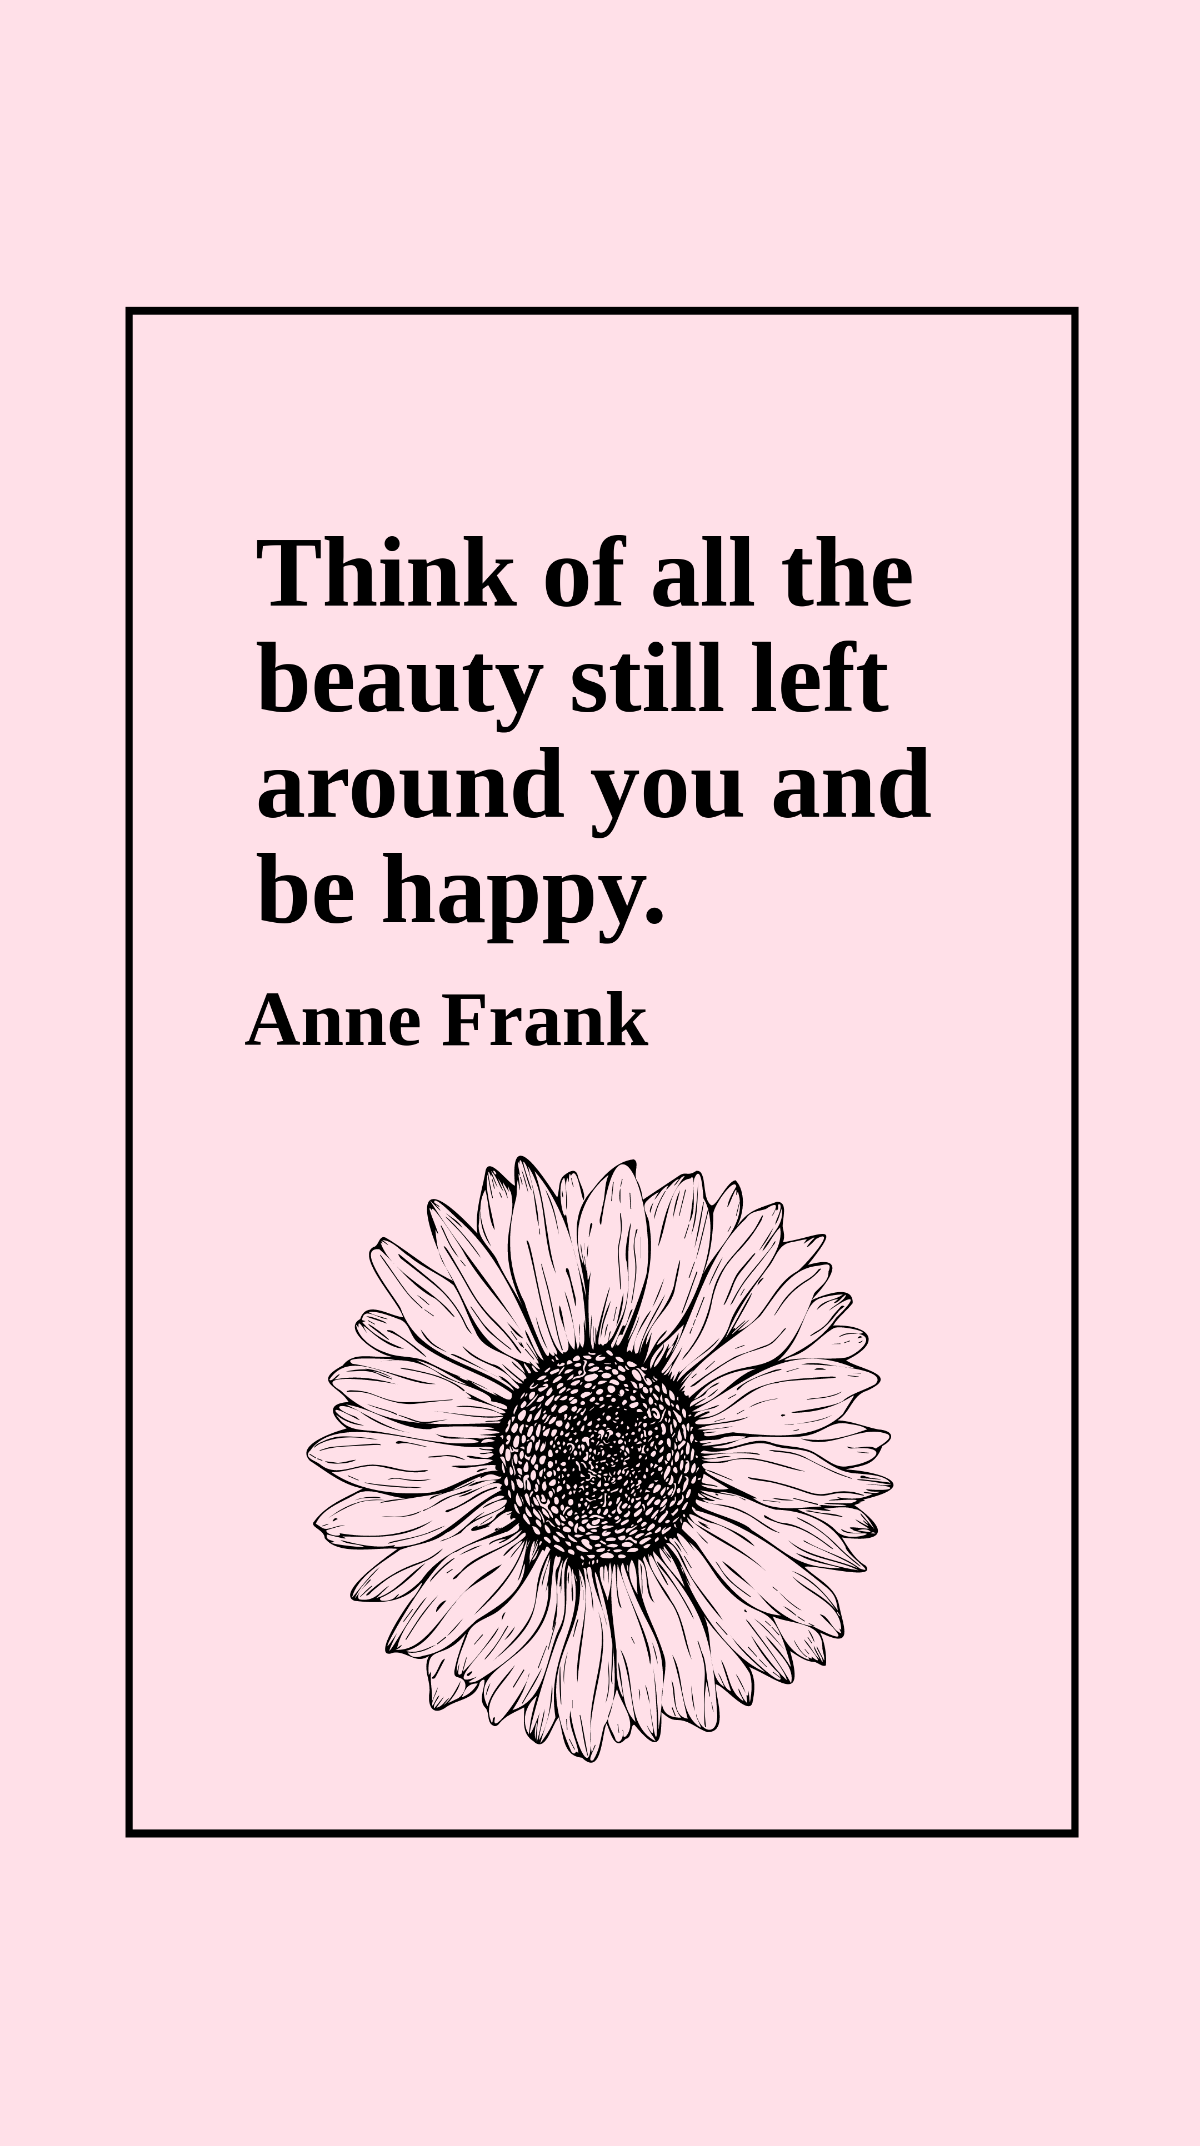 Anne Frank - Think of all the beauty still left around you and be happy.